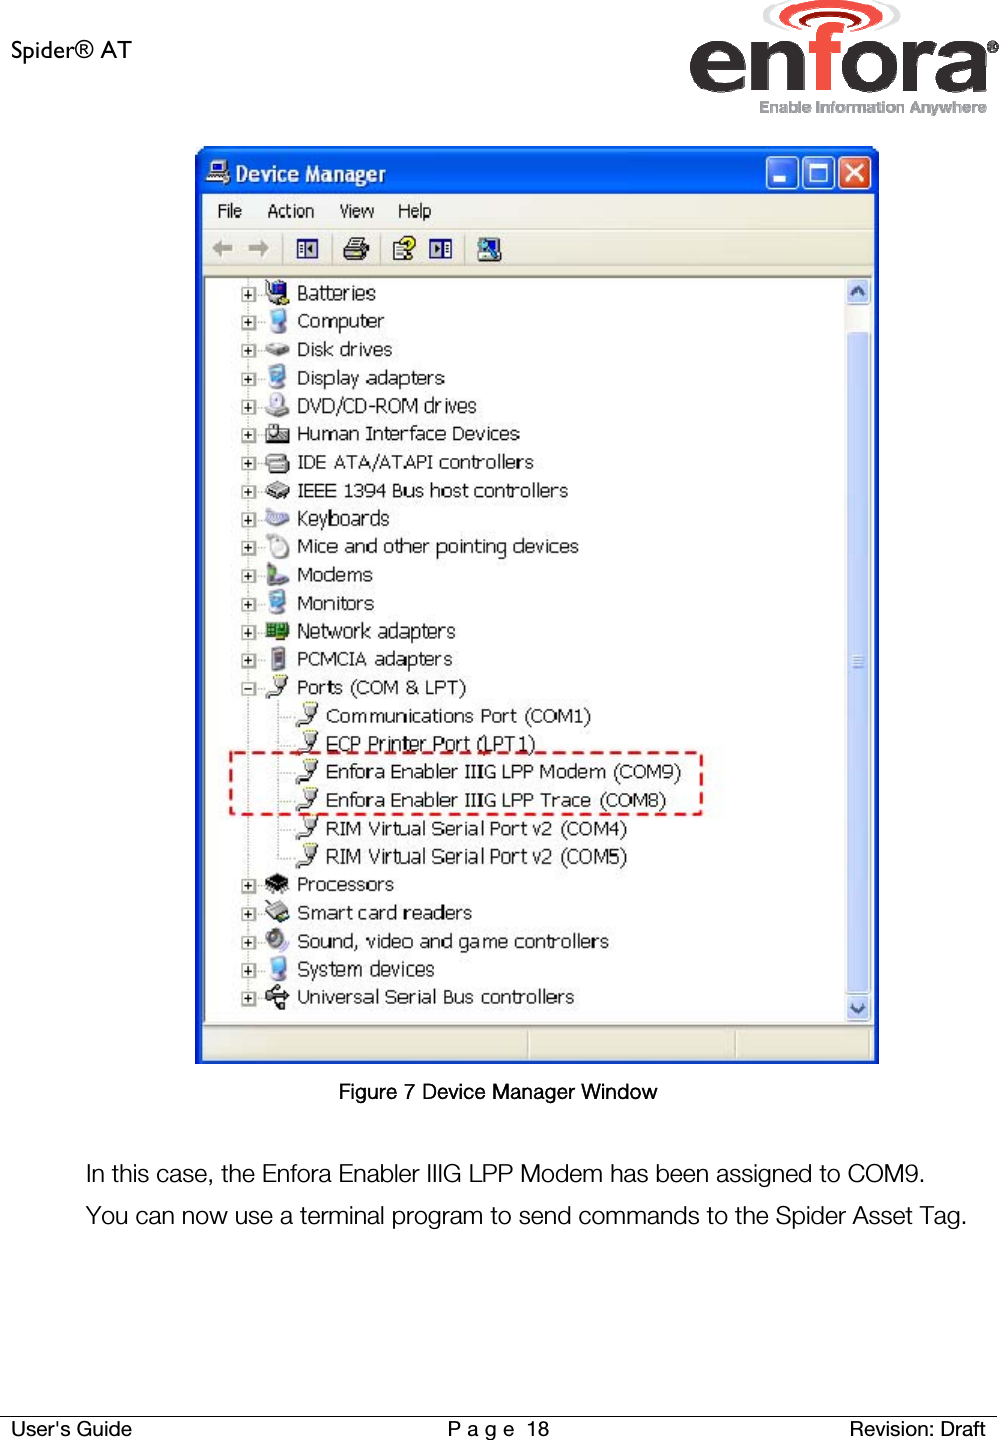 Spider® AT     User&apos;s Guide  P a g e 18 Revision: Draft  Figure 7 Device Manager Window  In this case, the Enfora Enabler IIIG LPP Modem has been assigned to COM9.  You can now use a terminal program to send commands to the Spider Asset Tag.    